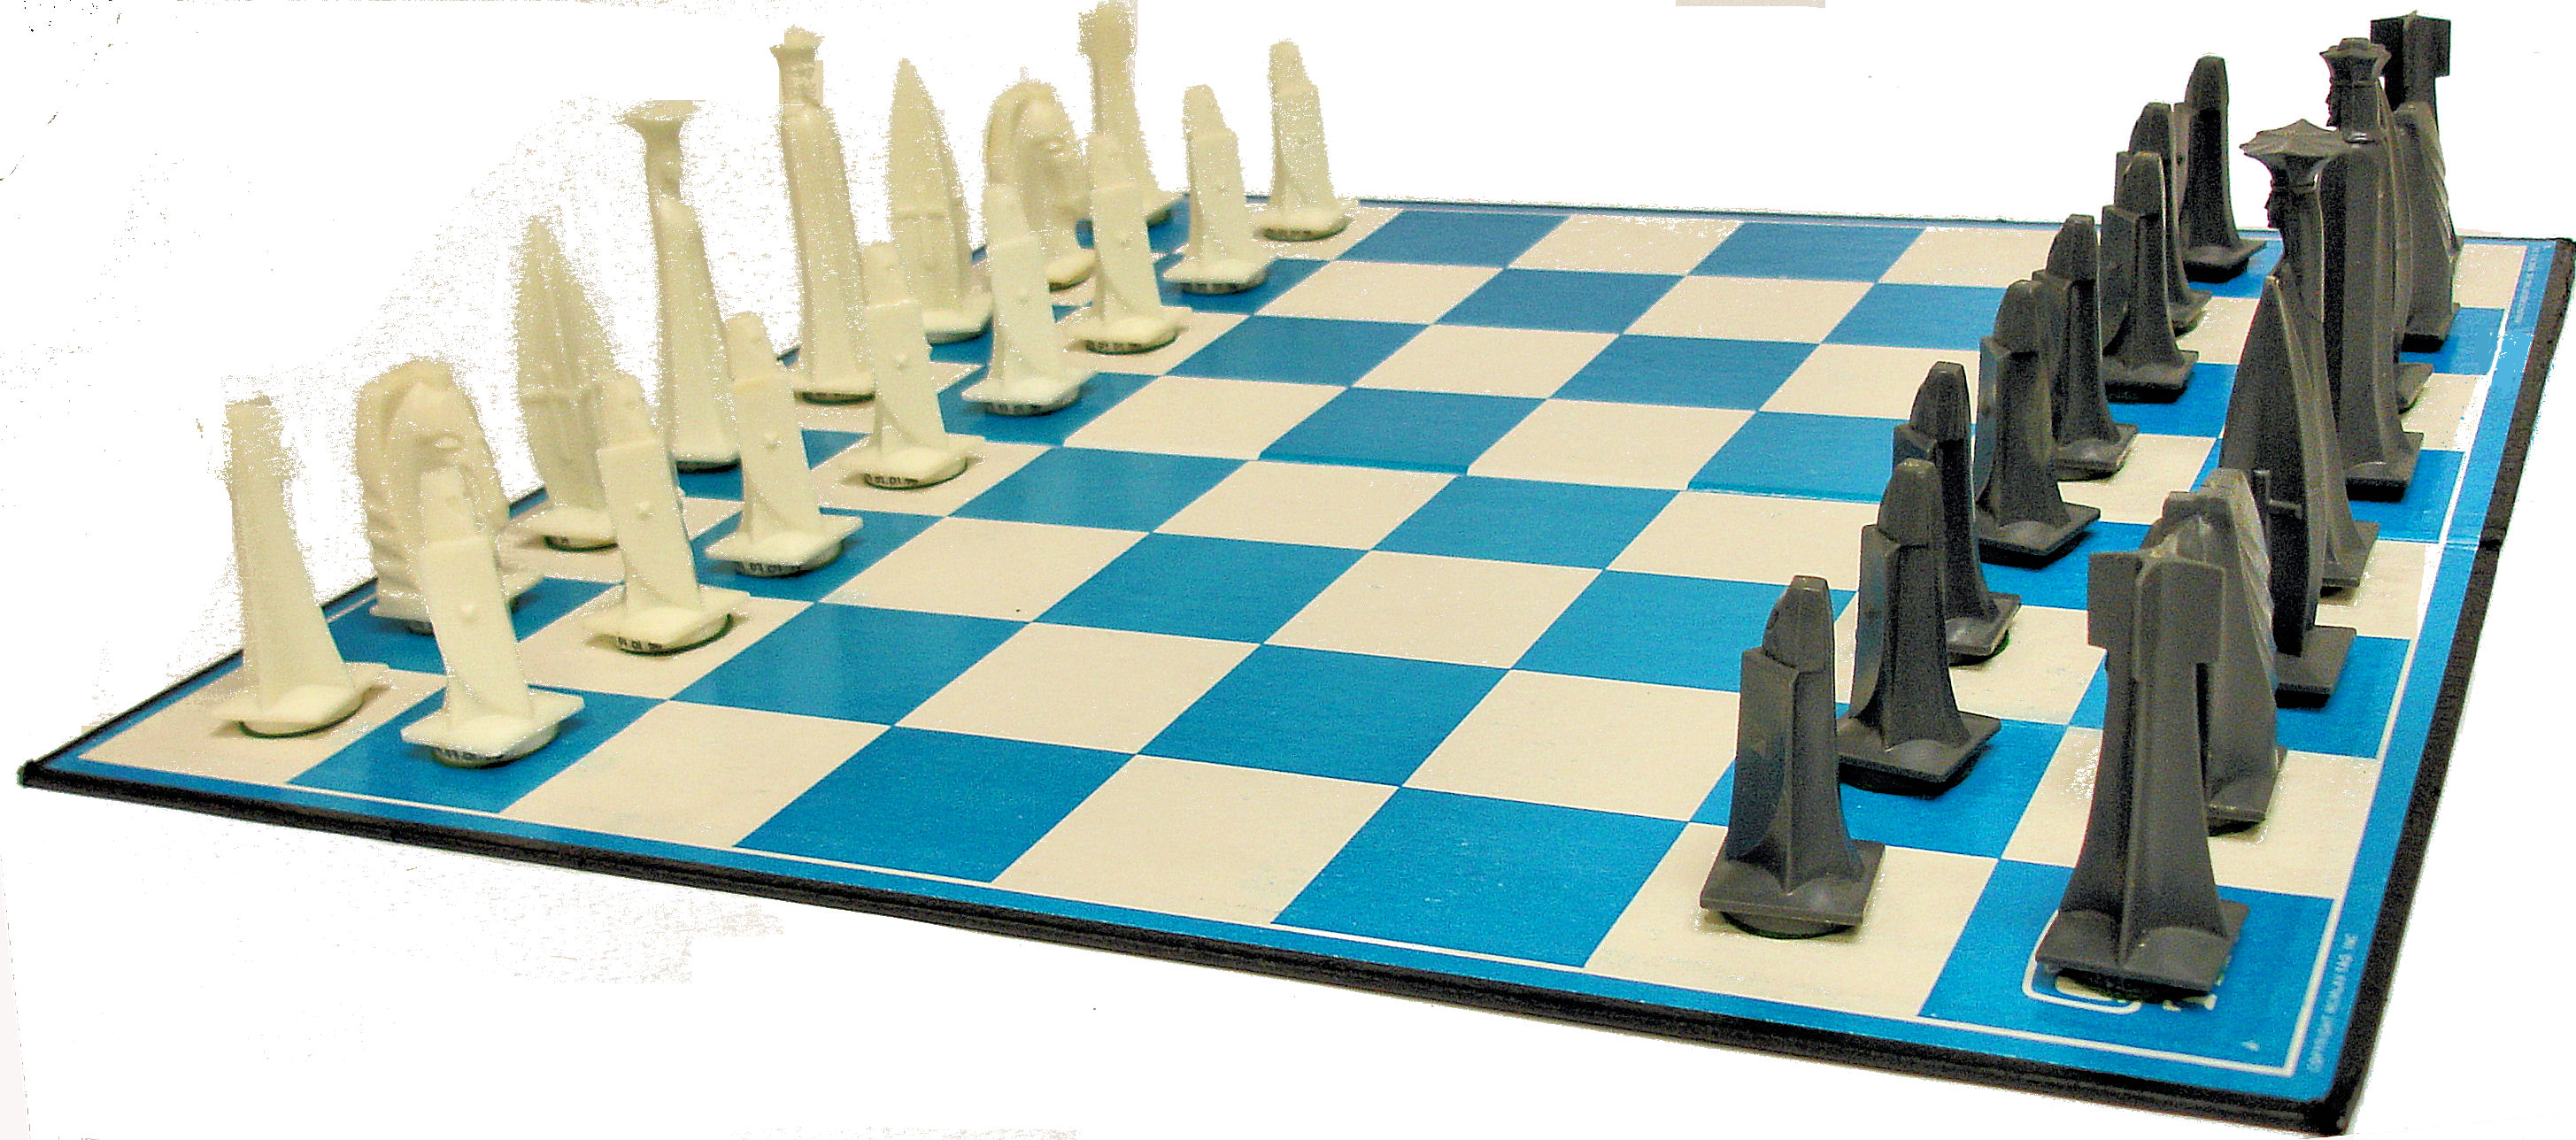 Overview of Visual chess board